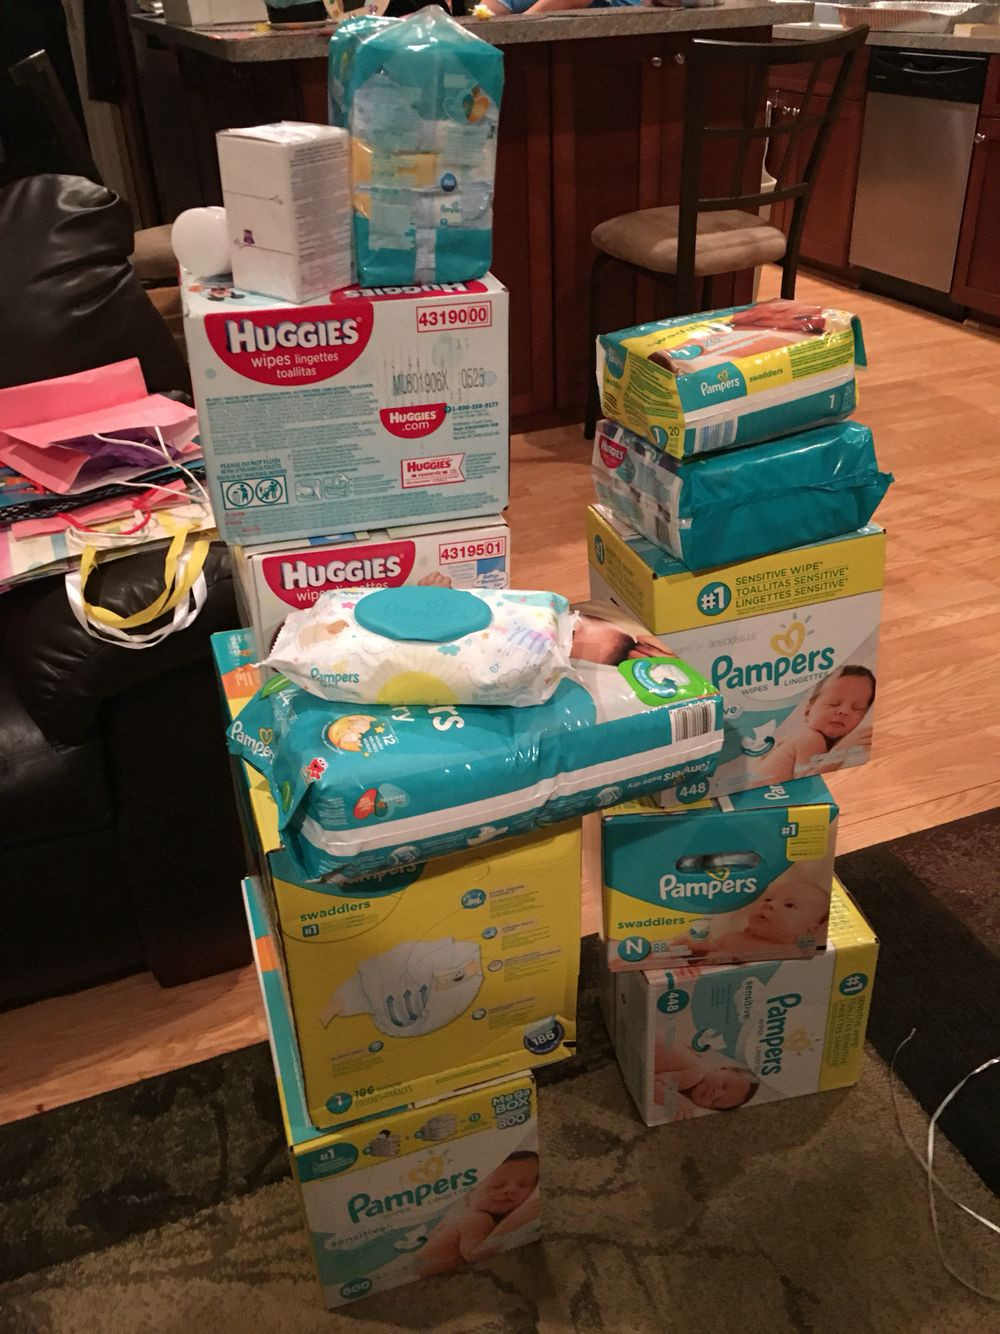 Gift Ideas For Baby Gender Reveal Party
 Ask guest to bring us Diaper and wipes for gender reveal